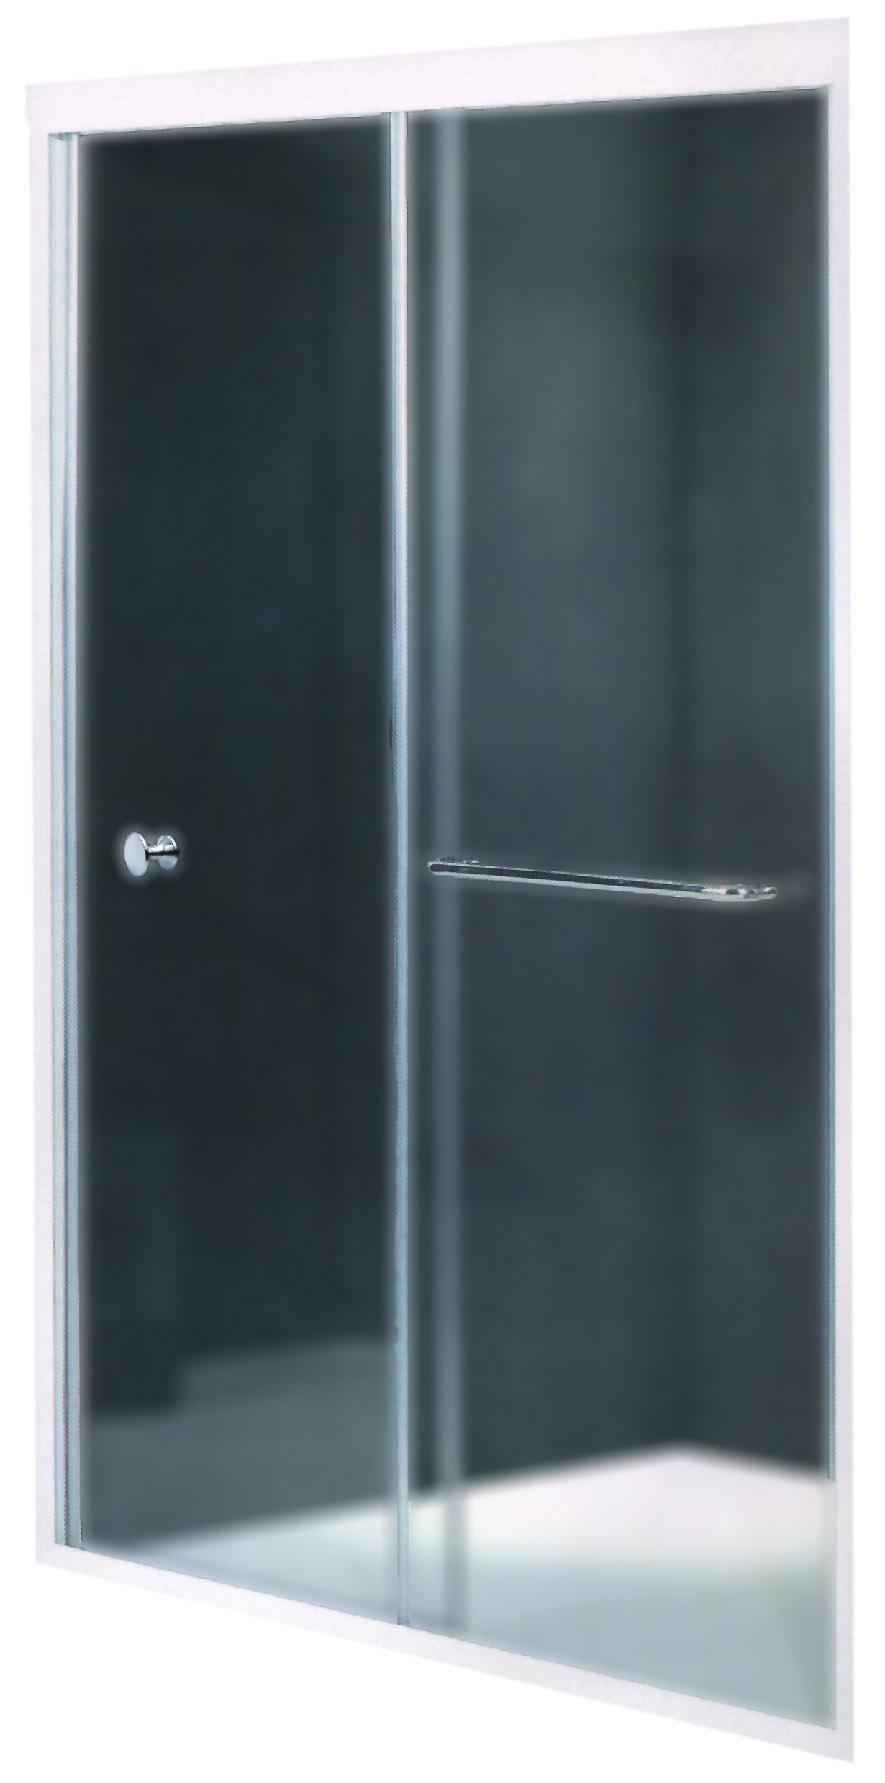 ROMA WALL TO WALL SHOWER CUBICLE SL/G 115-120X185CM 6MM CHROME FRAME/UNCLEAR GLASS